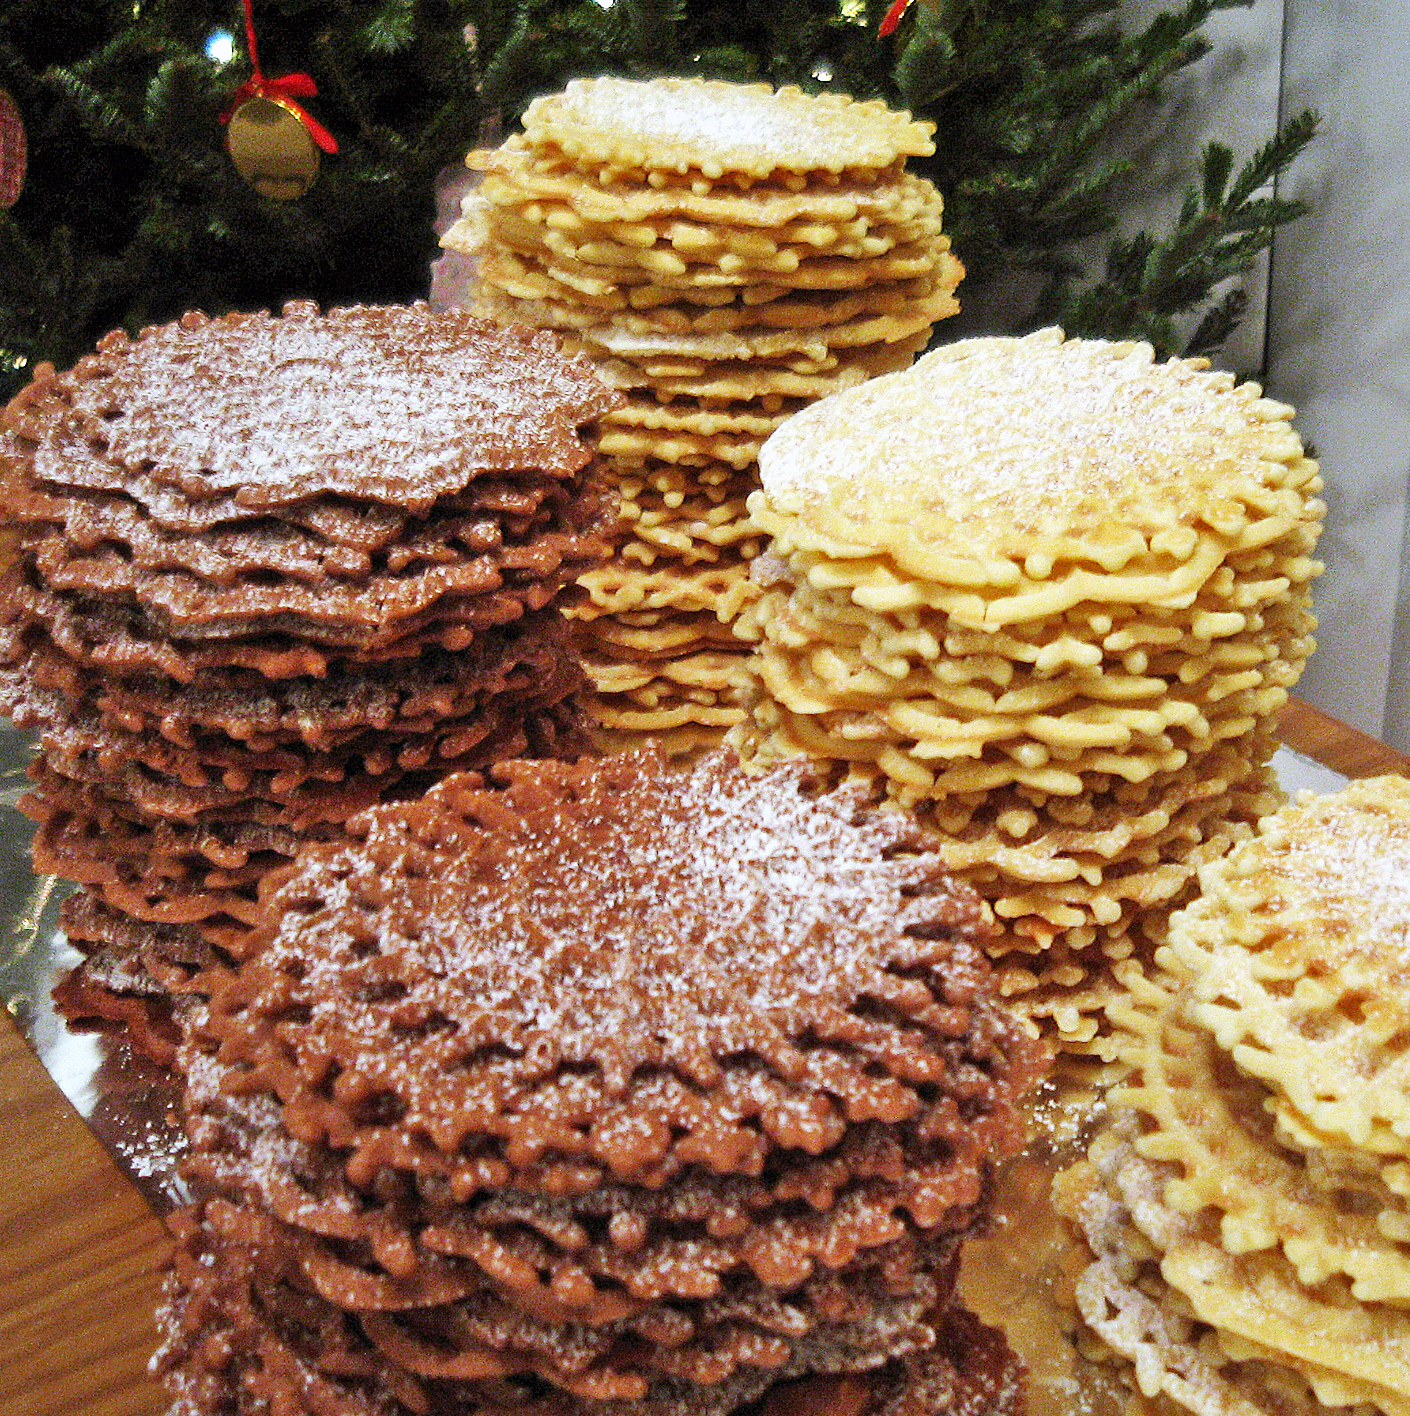 How to Make Pizzelle Cookies with Vitantonio Pizzelle Maker 